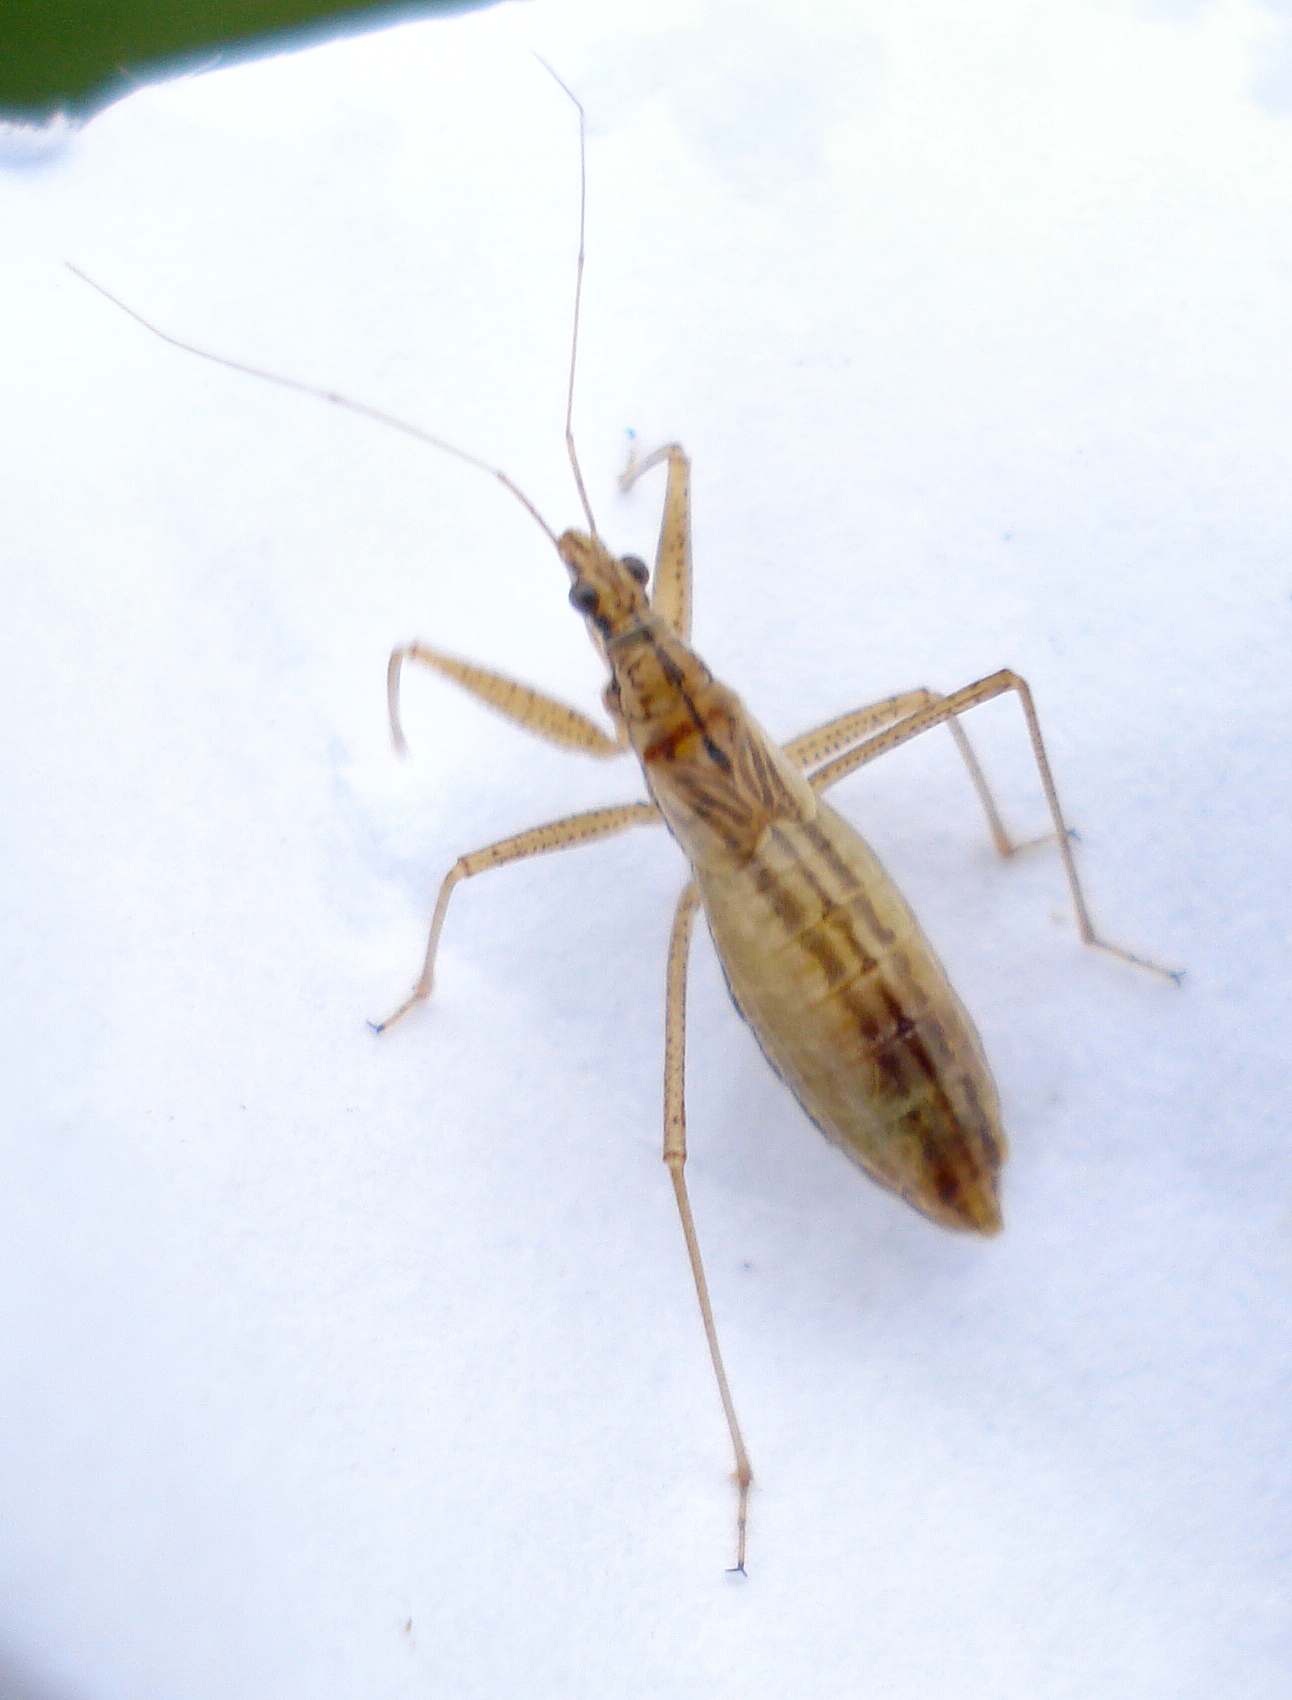 a close up of a bug on white snow